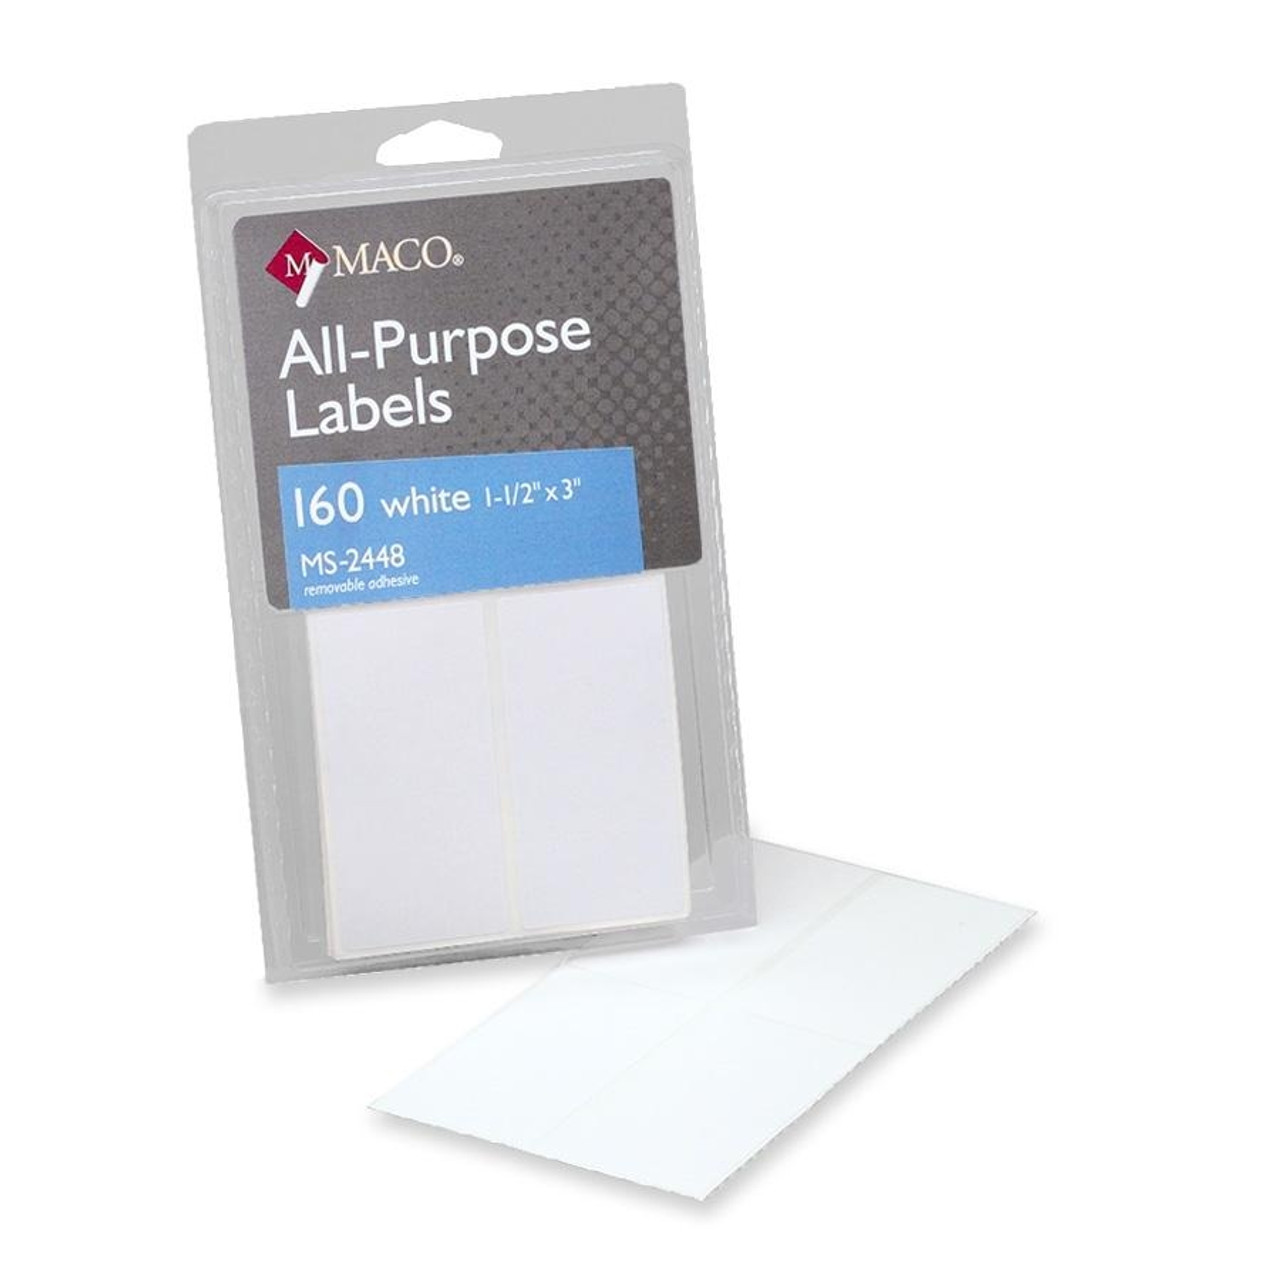 Maco Multi-Purpose Self-Adhesive Removable Labels 1 1/2 x 3 White 160/Pack